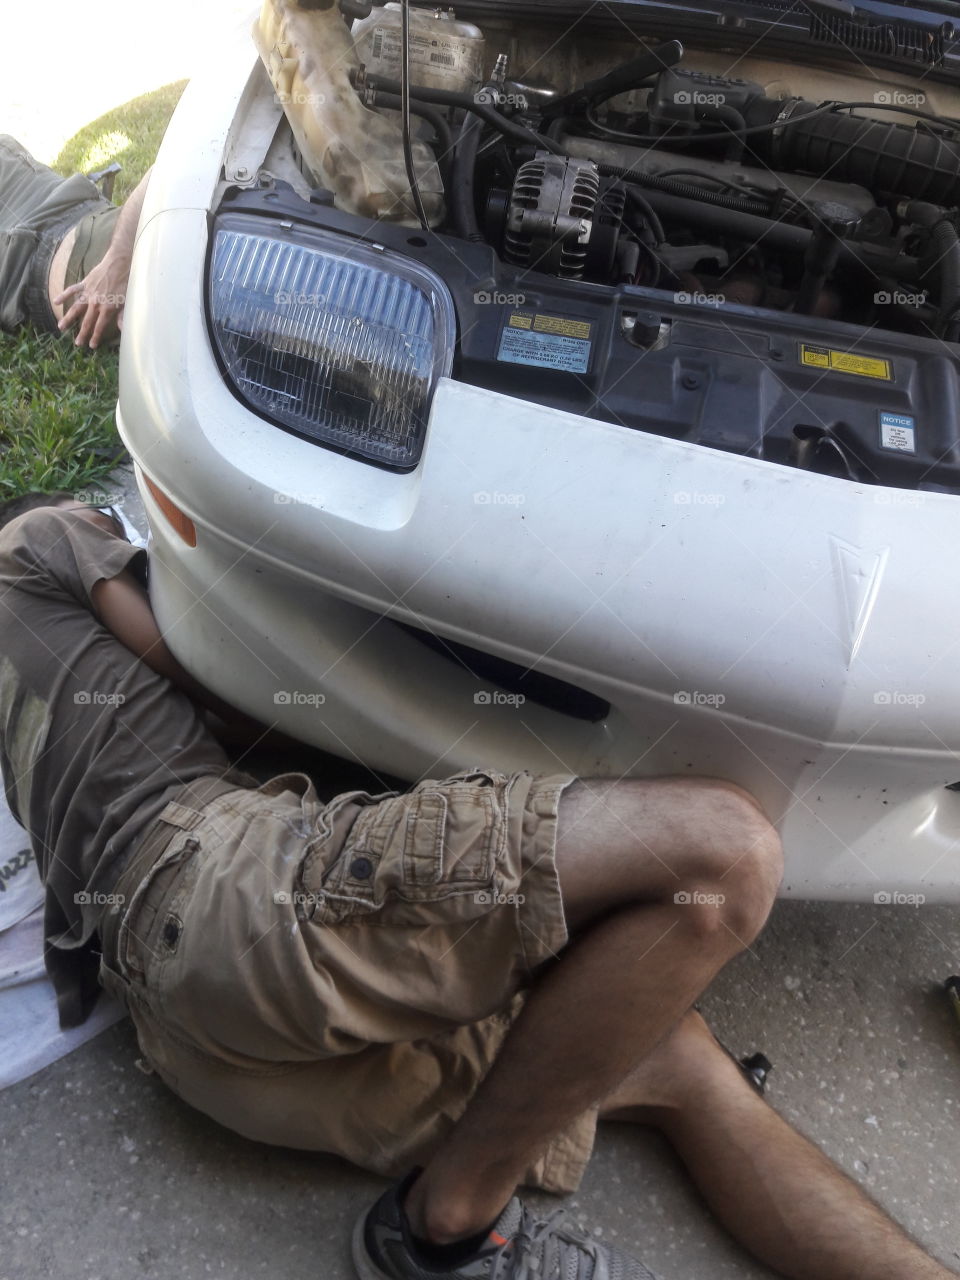 save money work on your own car fix it repair